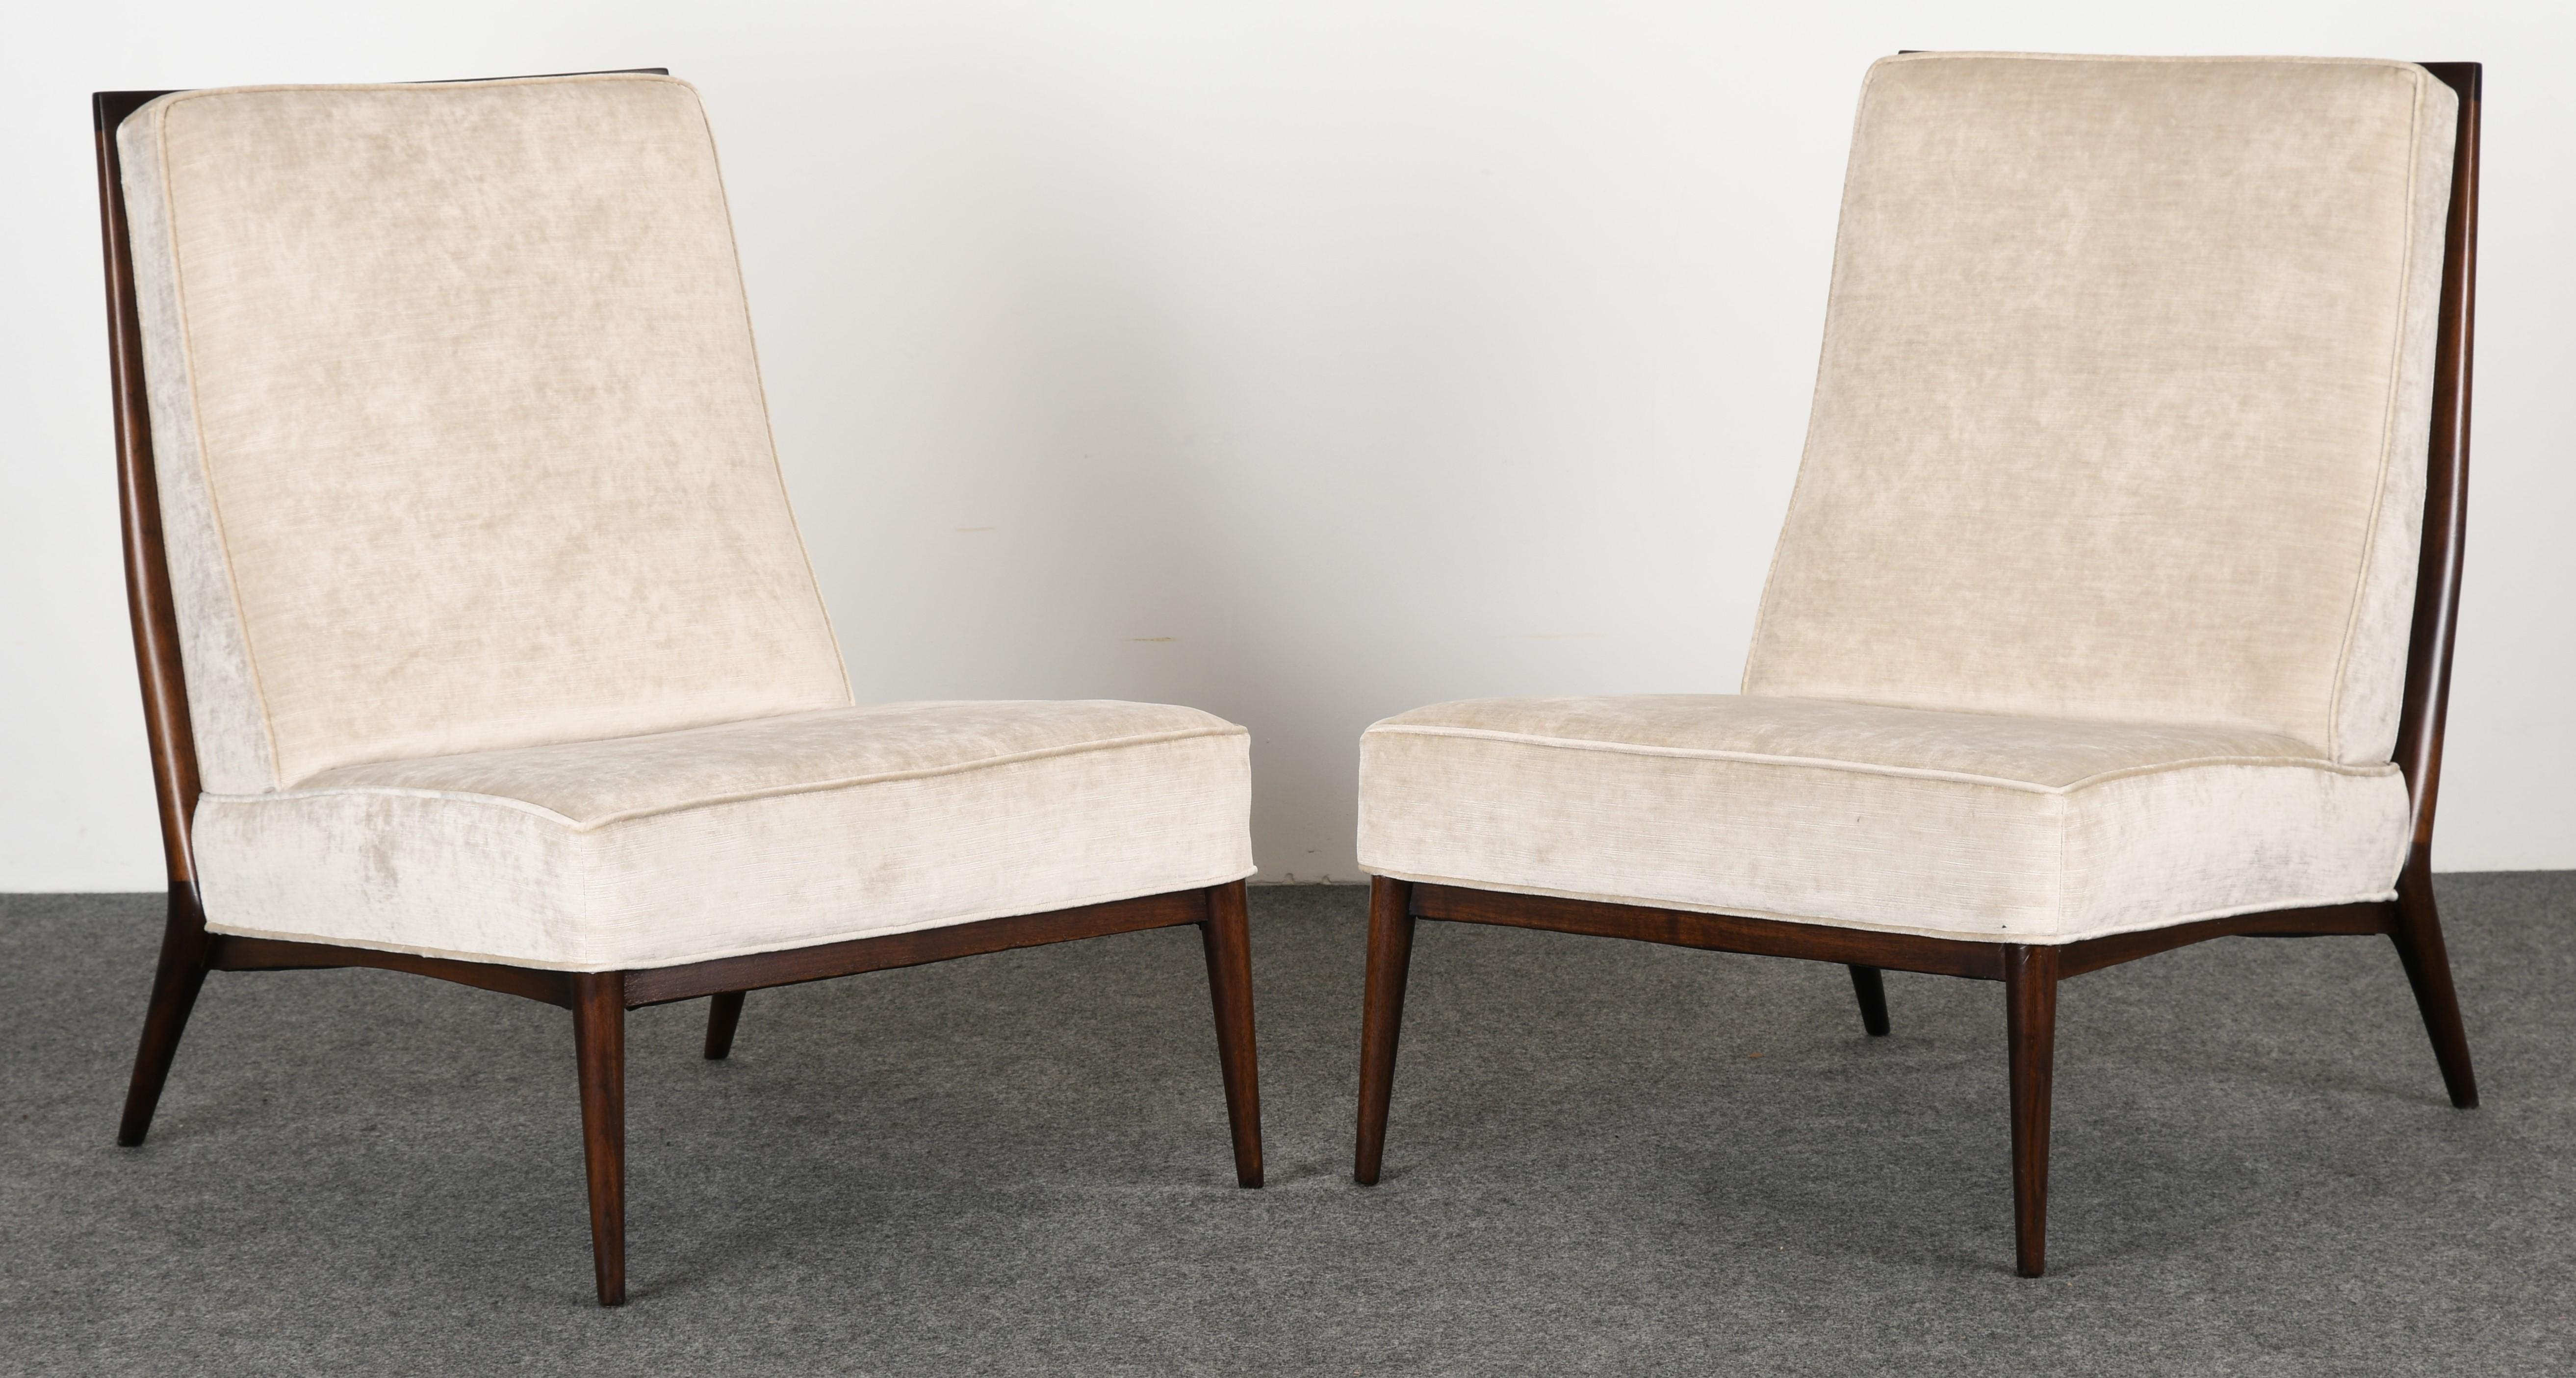 A newly upholstered pair of Paul McCobb Model 5000 slipper chairs for Directional. Upholstered in a Holly Hunt neutral velvet. The chairs are stained in an espresso walnut finish. The chairs are structurally sound and in excellent condition.